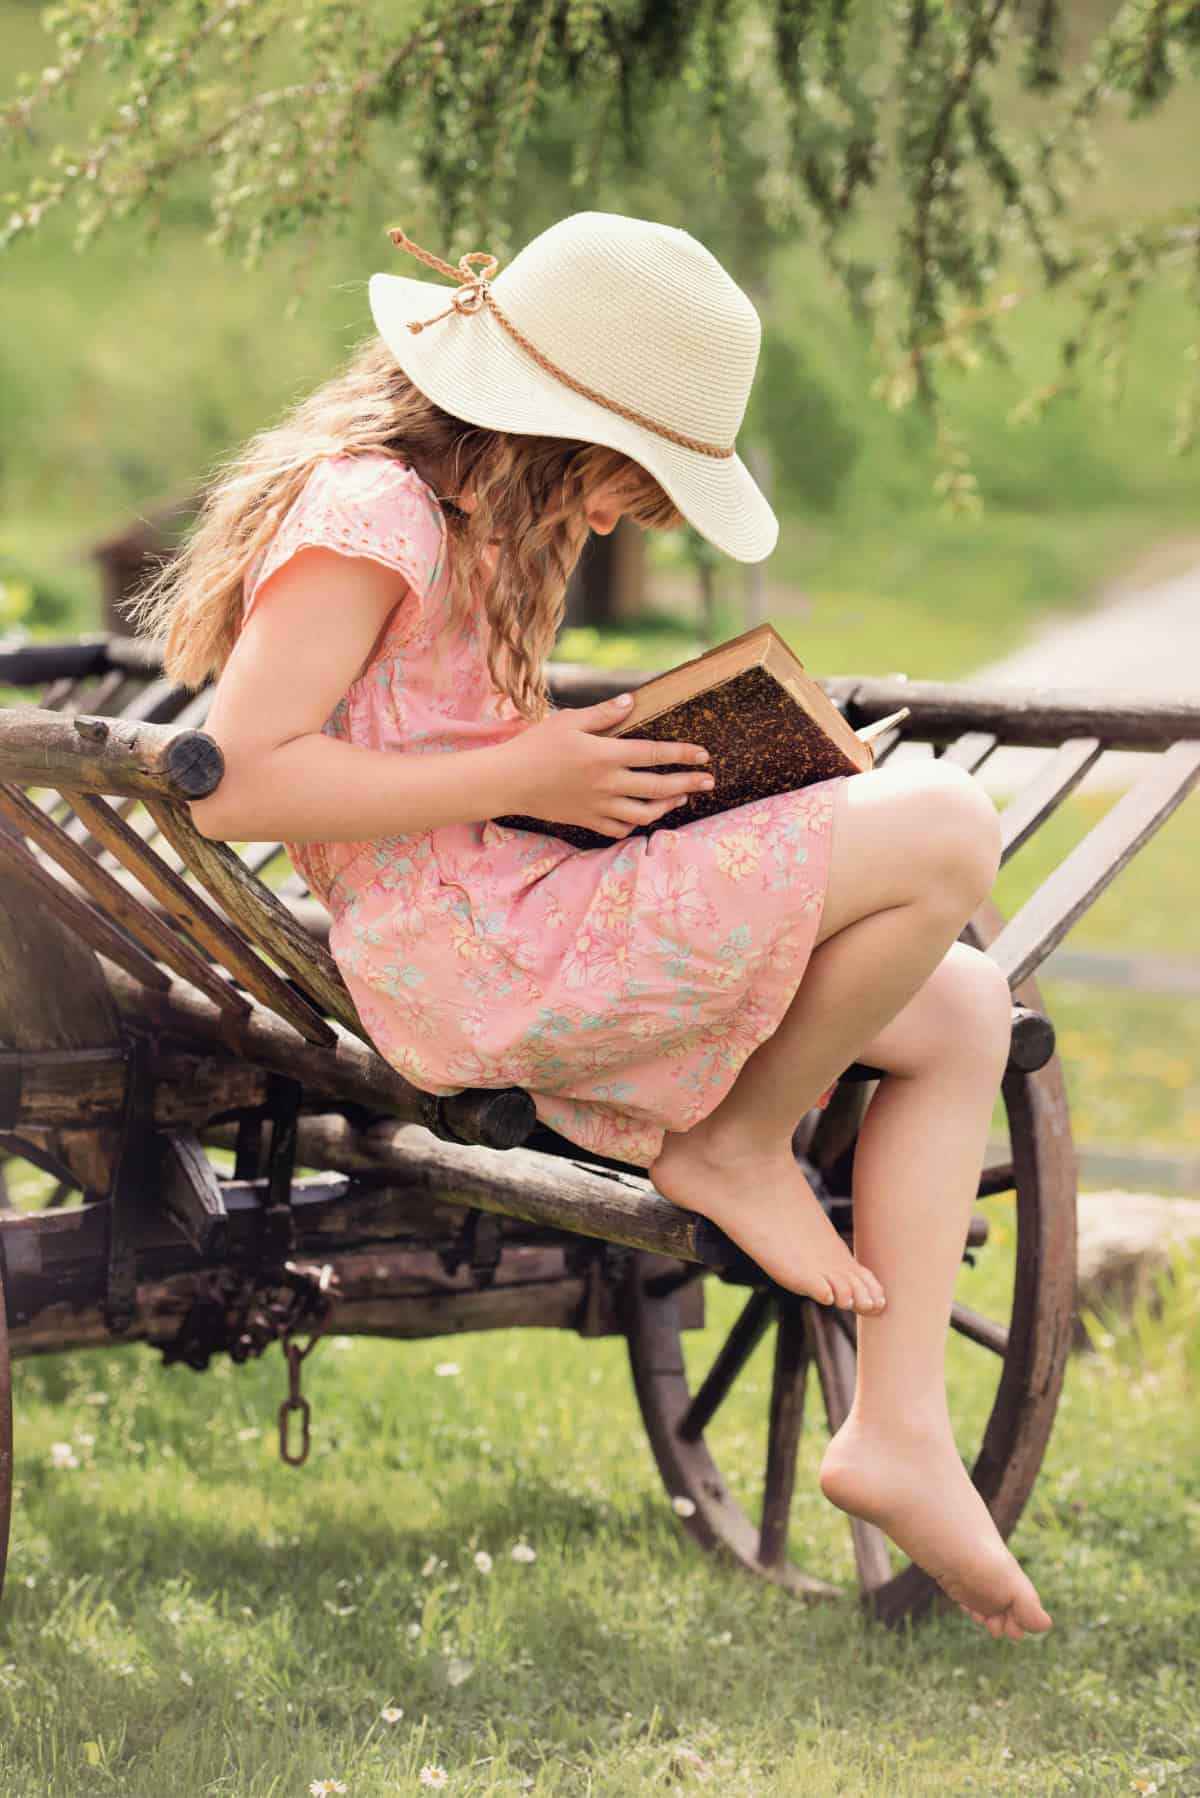 5 Inspiring Reads for Families